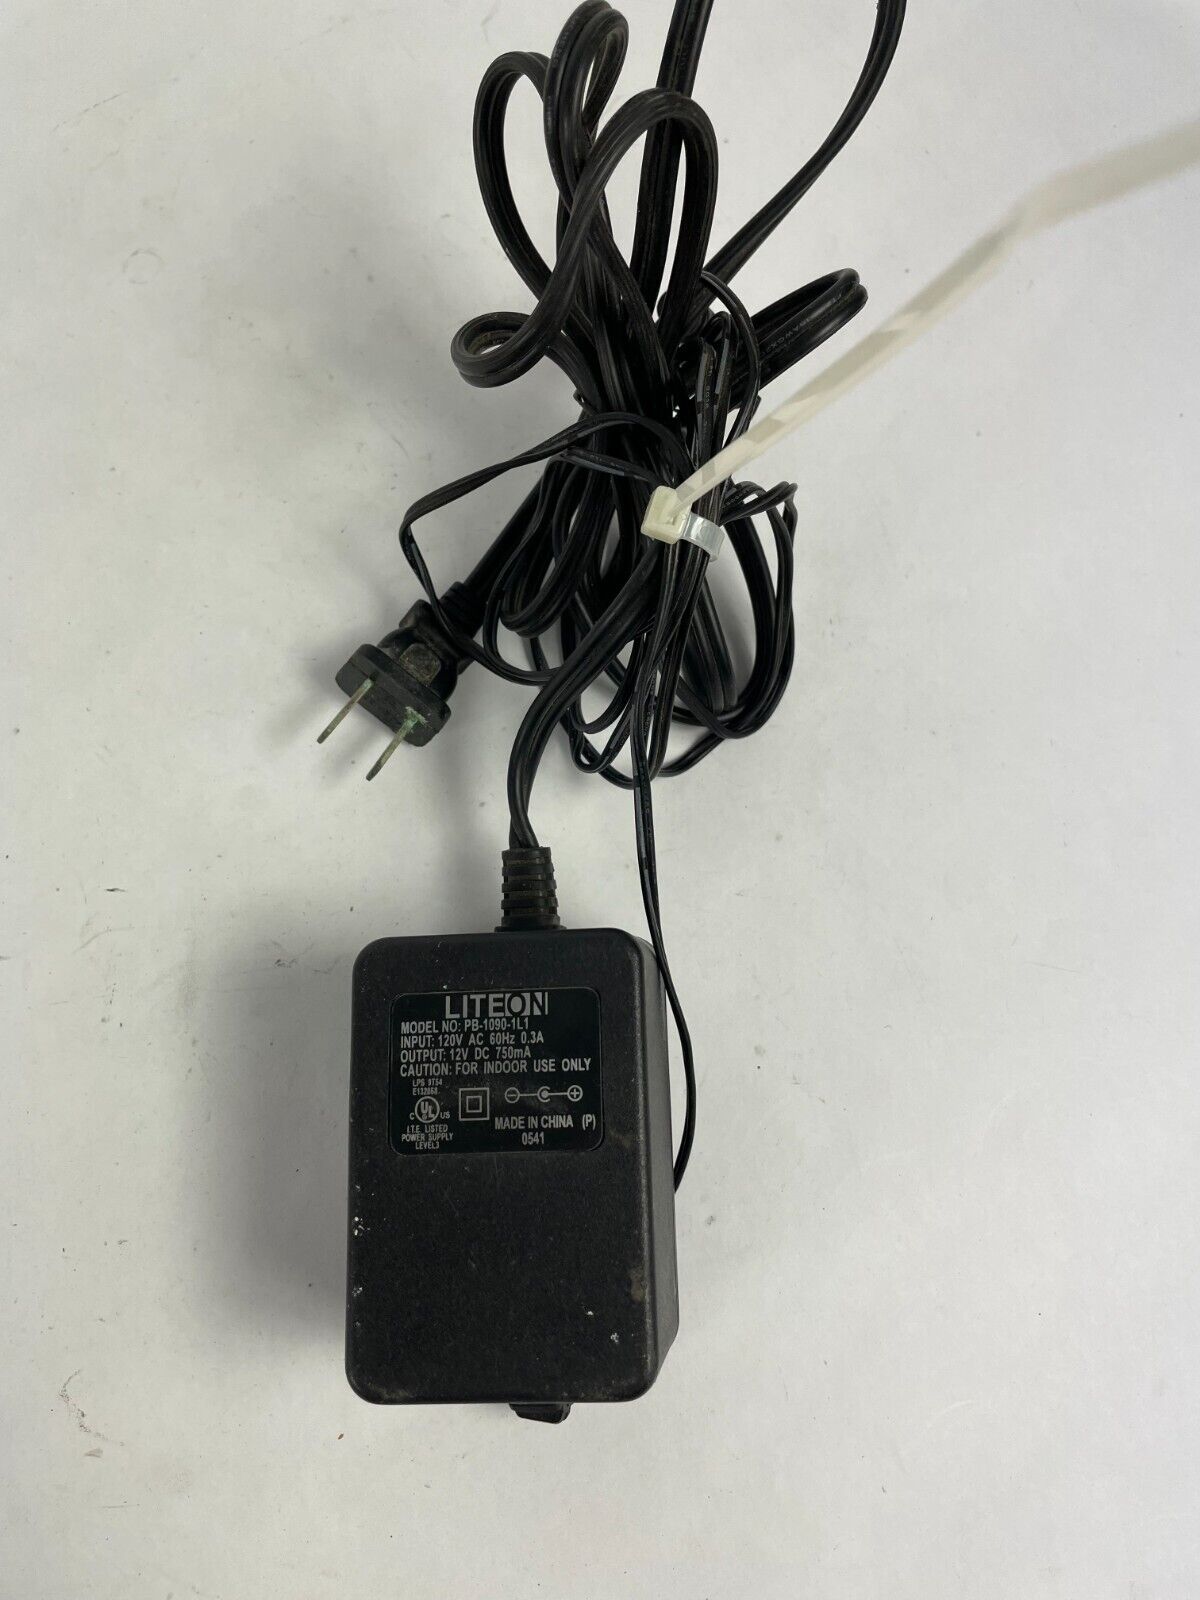 Genuine LITE ON PB-1090-1L1 Ac Adapter Output 12V 750mA Power Supply Adapter A59